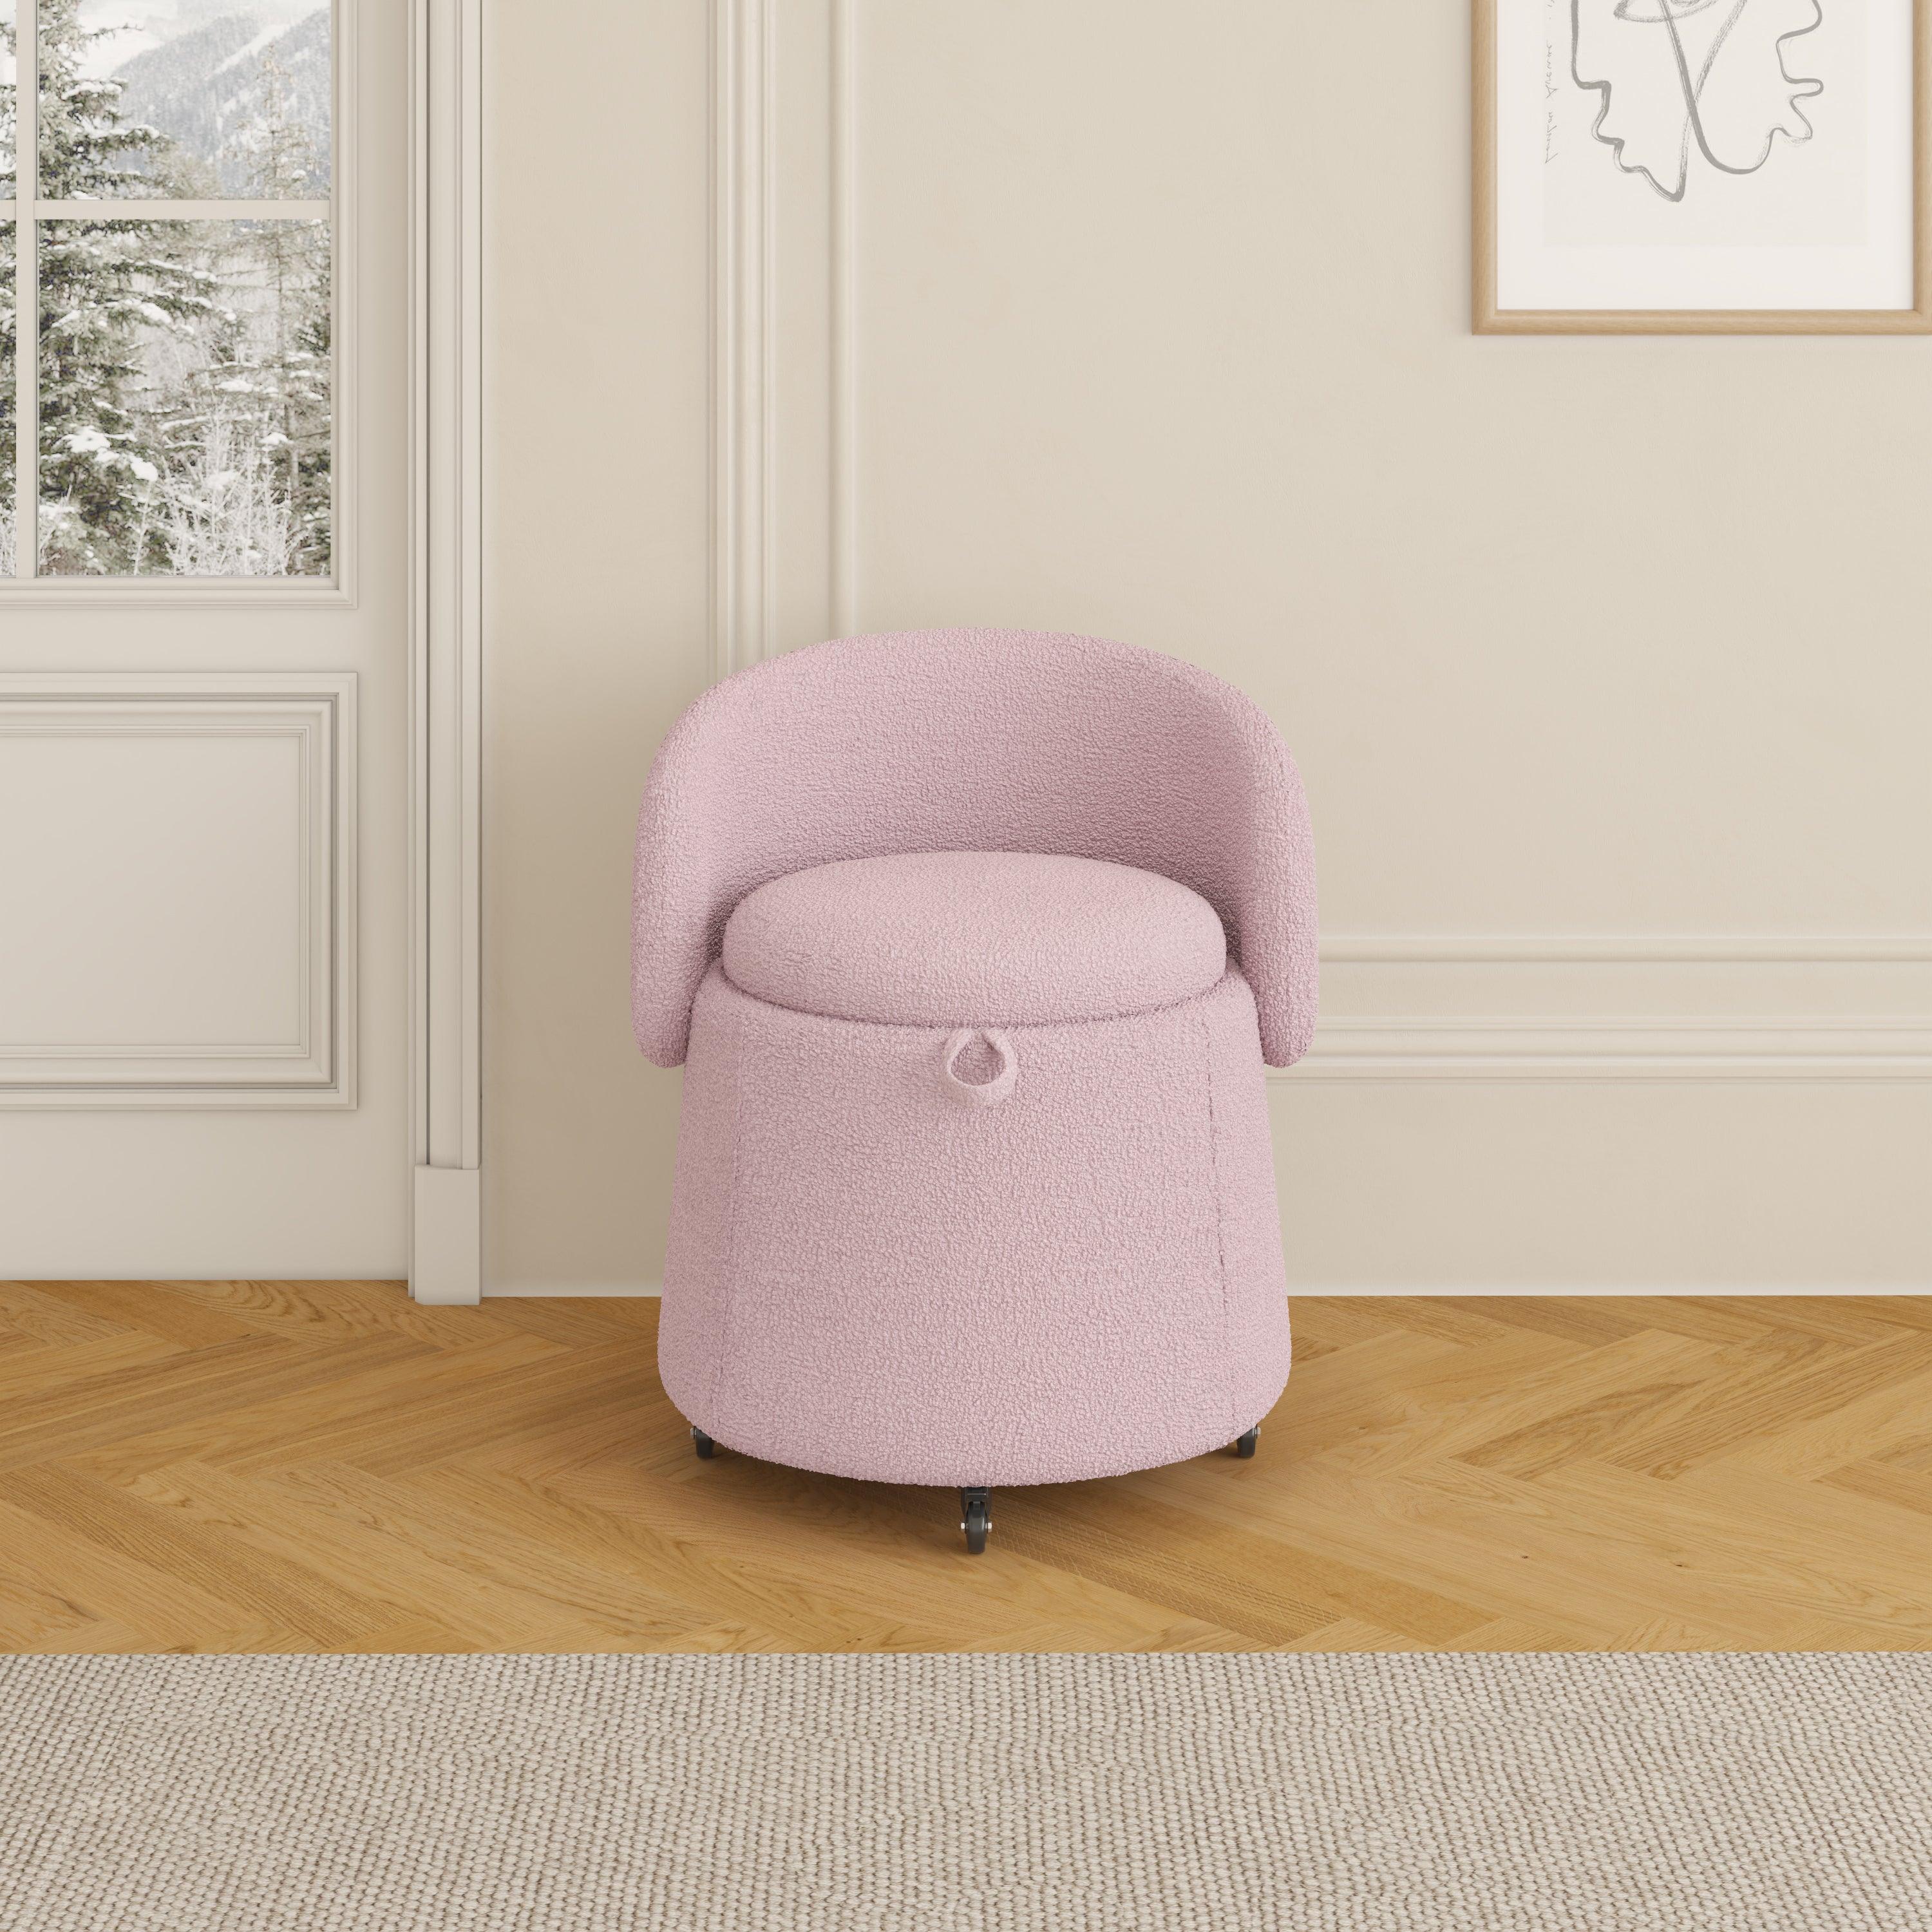 🆓🚛 Multi-Functional Stool 23" Movable Storage, Pink Teddy Fleece Everywhere in The Bedroom & Living Room